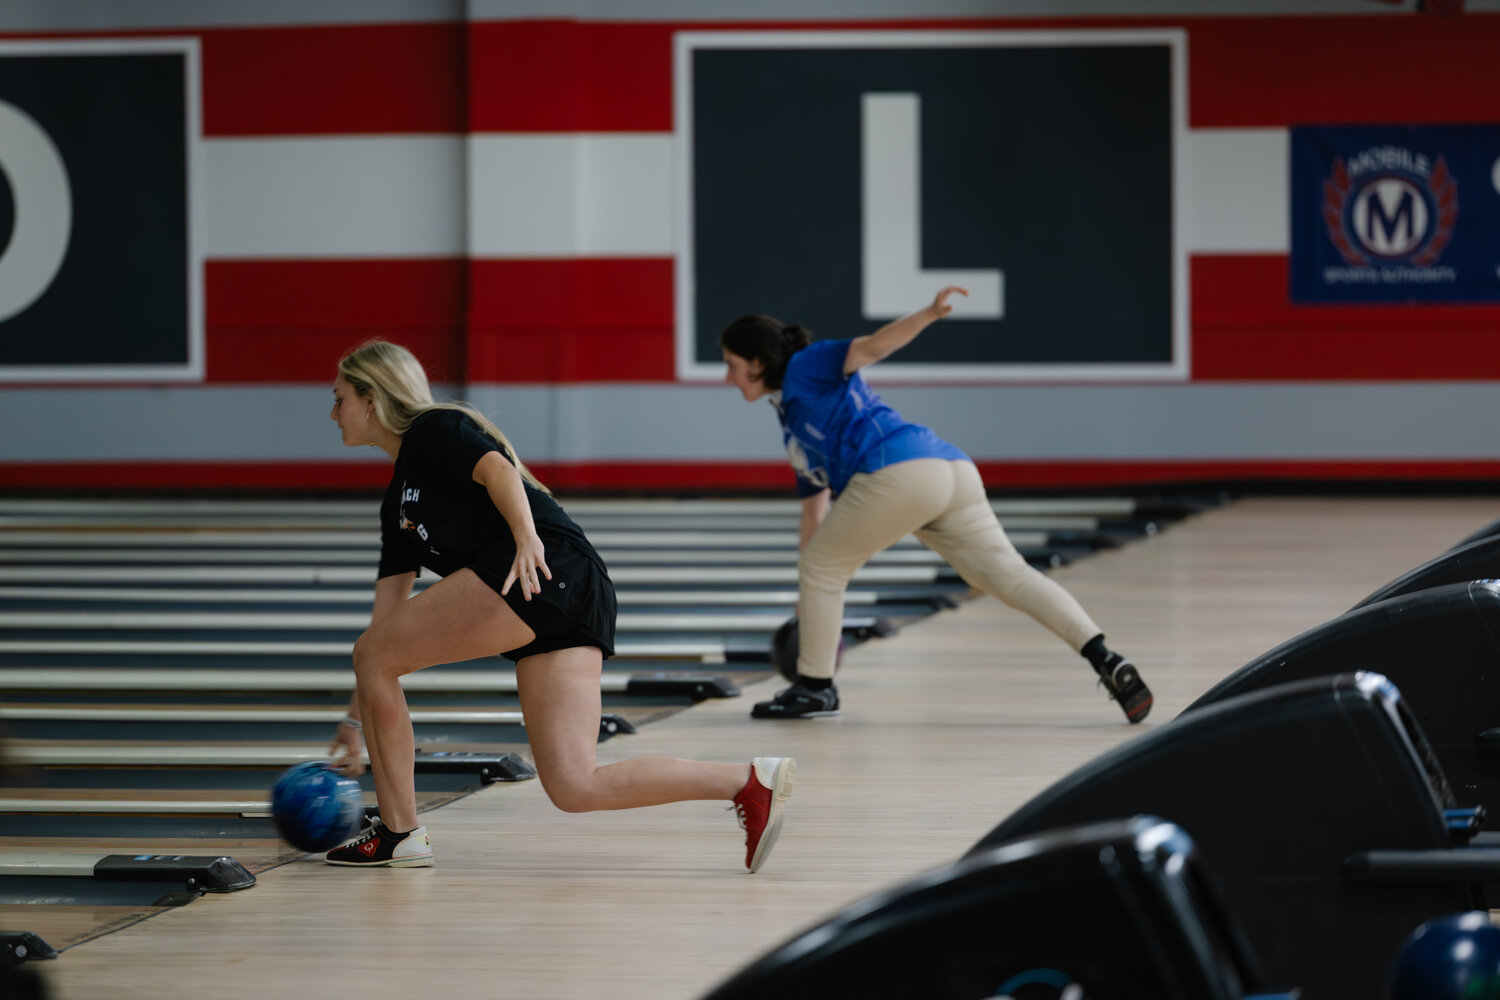 Orange Beach’s Addy Oldham fires a shot during Friday morning’s finals of the AHSAA State Bowling Championships in Mobile. The Makos were in the postseason after they recorded the first undefeated regular season in program history.